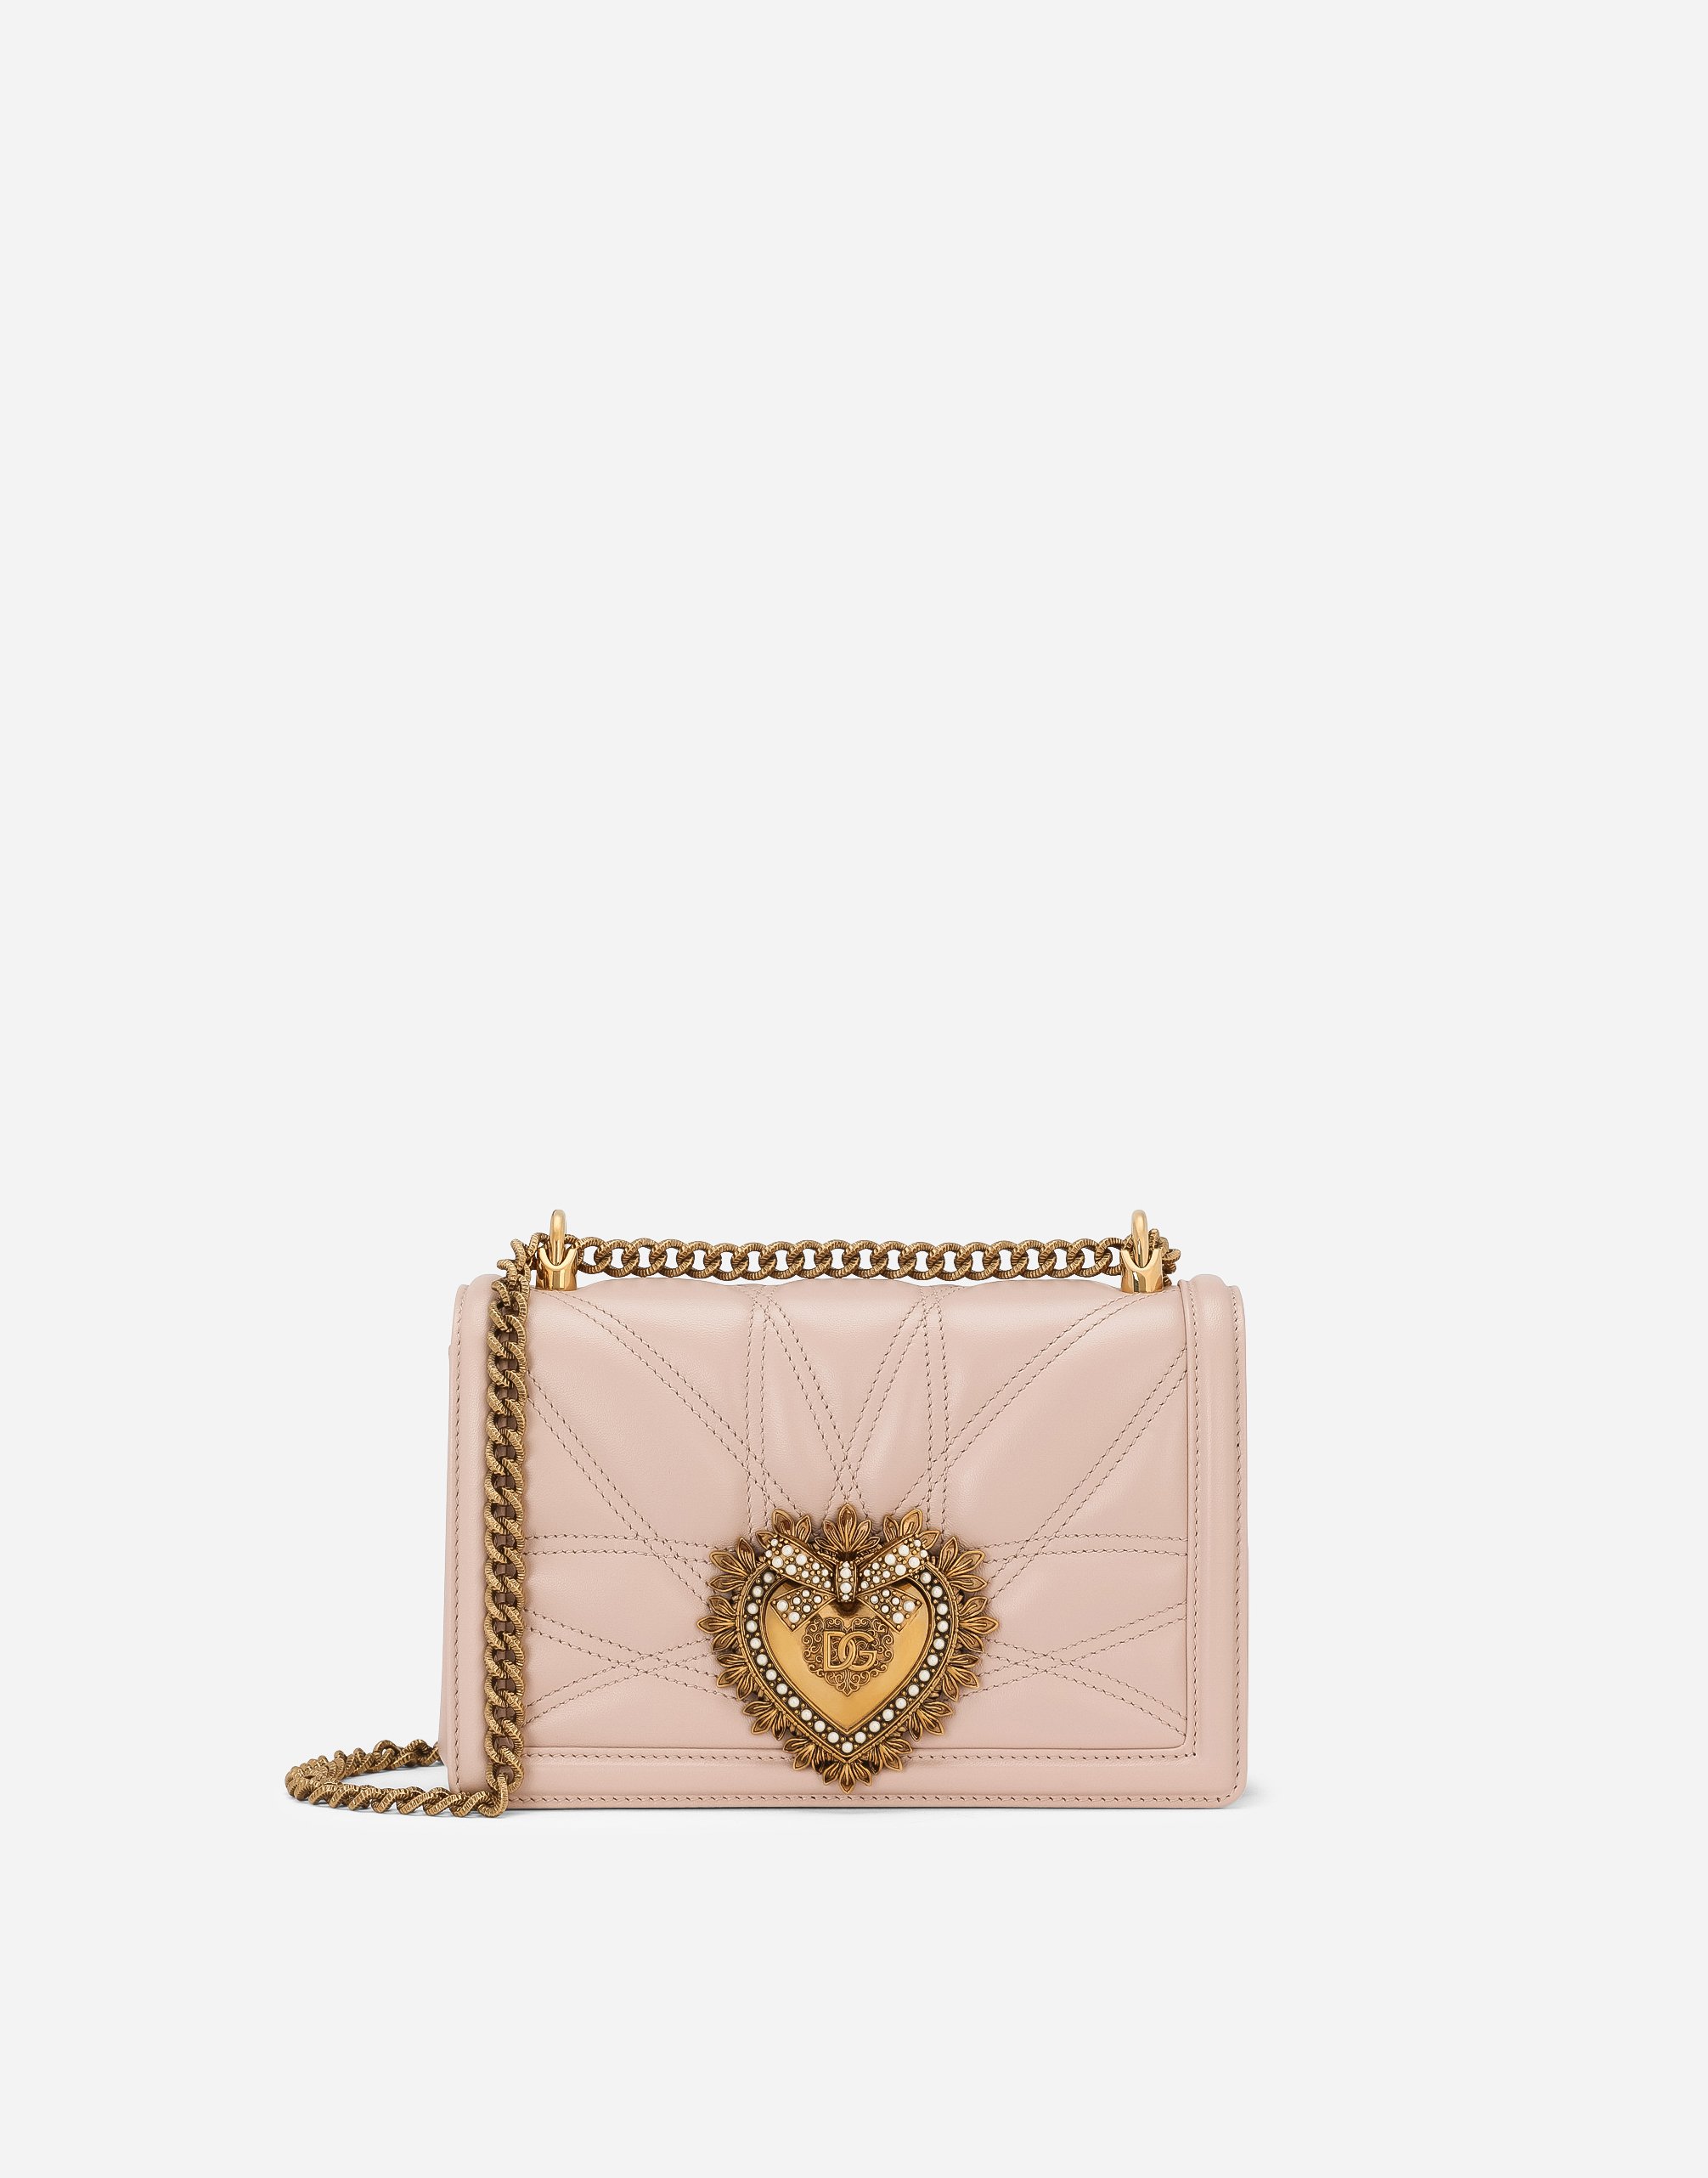 Dolce & Gabbana Medium Devotion Bag In Quilted Nappa Leather In Pale Pink